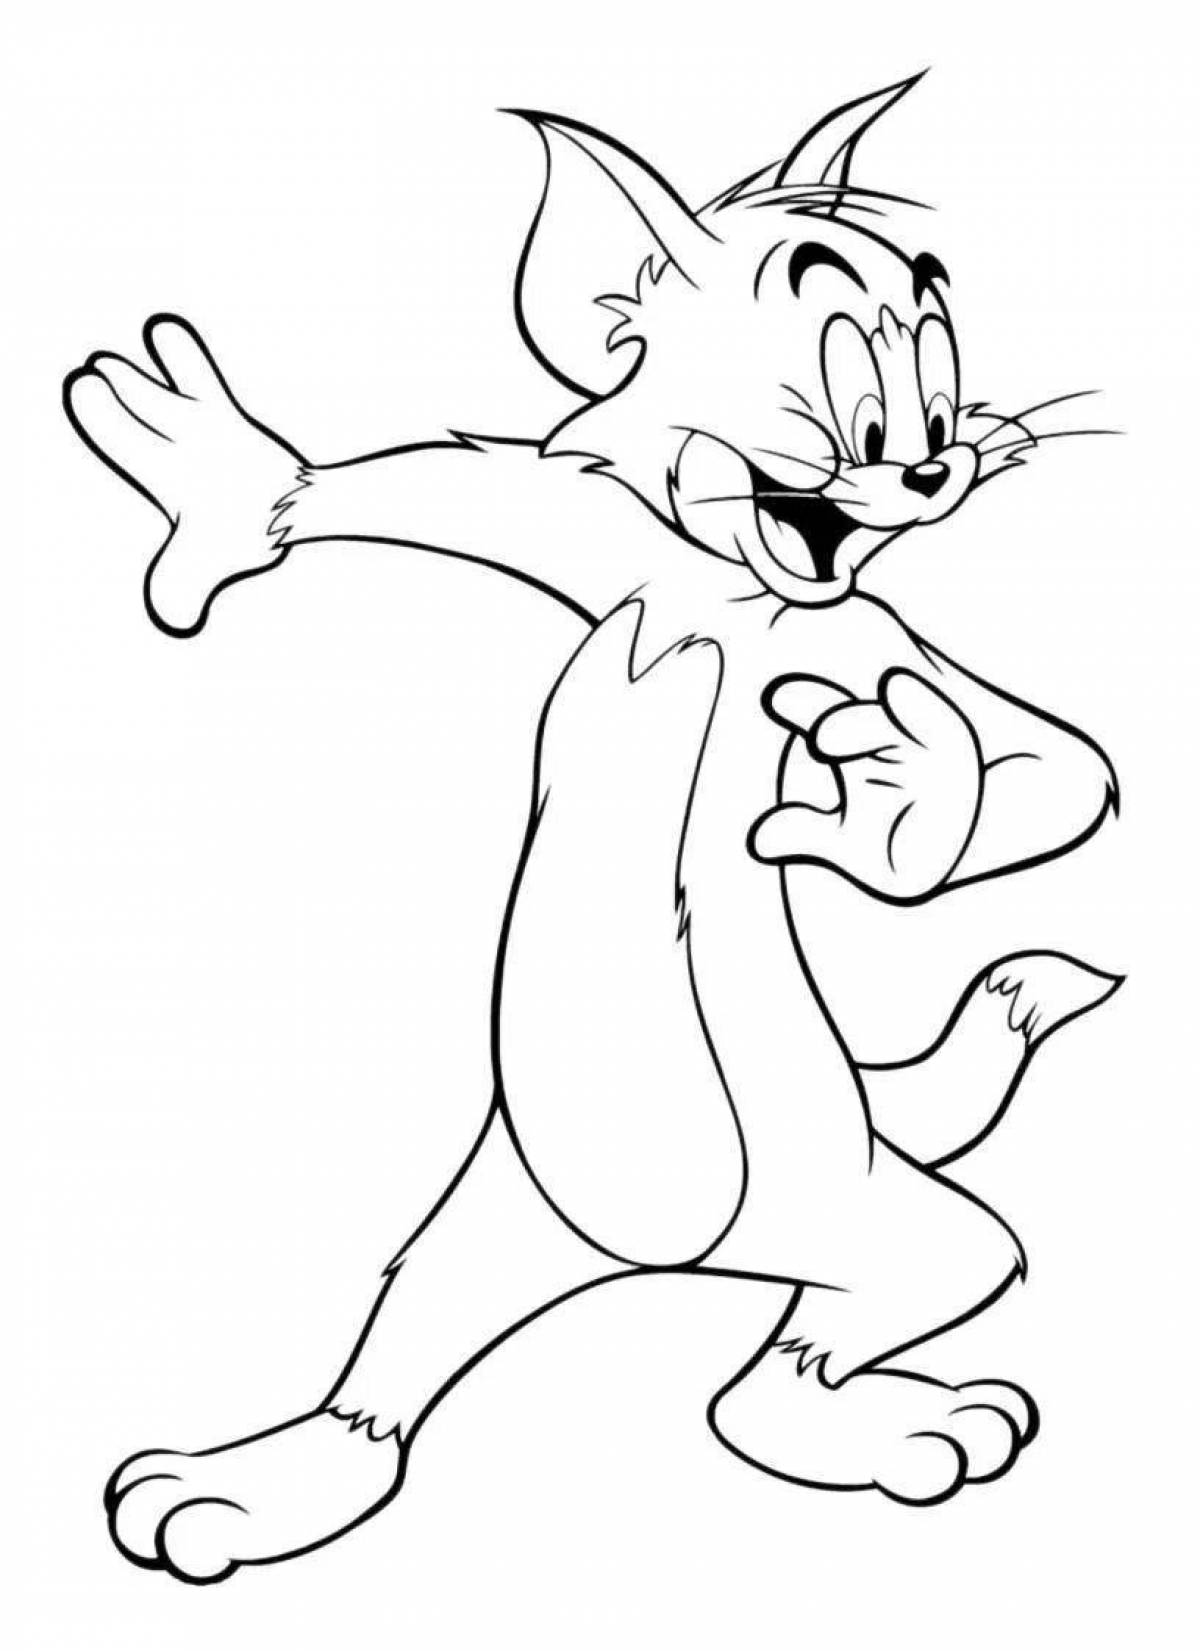 Glowing jerry coloring page